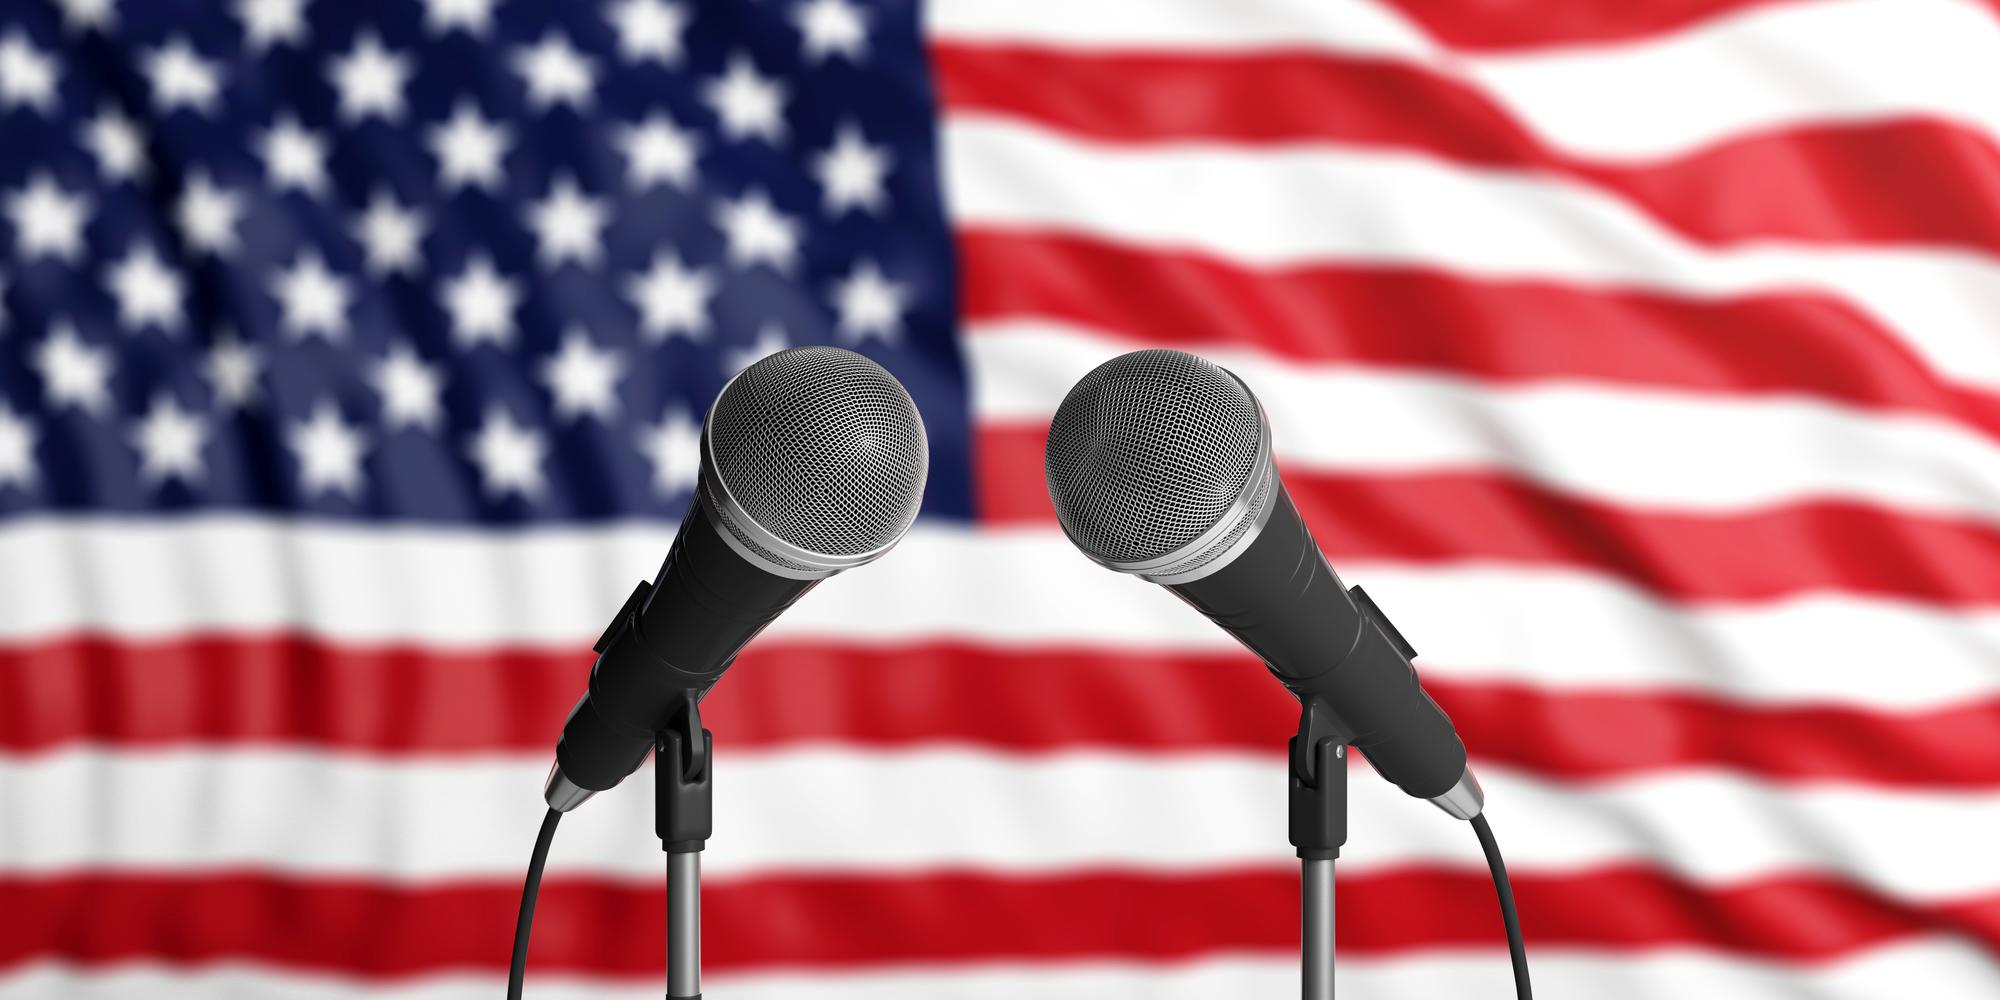 New Studies Published on Television and Digital Advertising in the 2022 Midterms